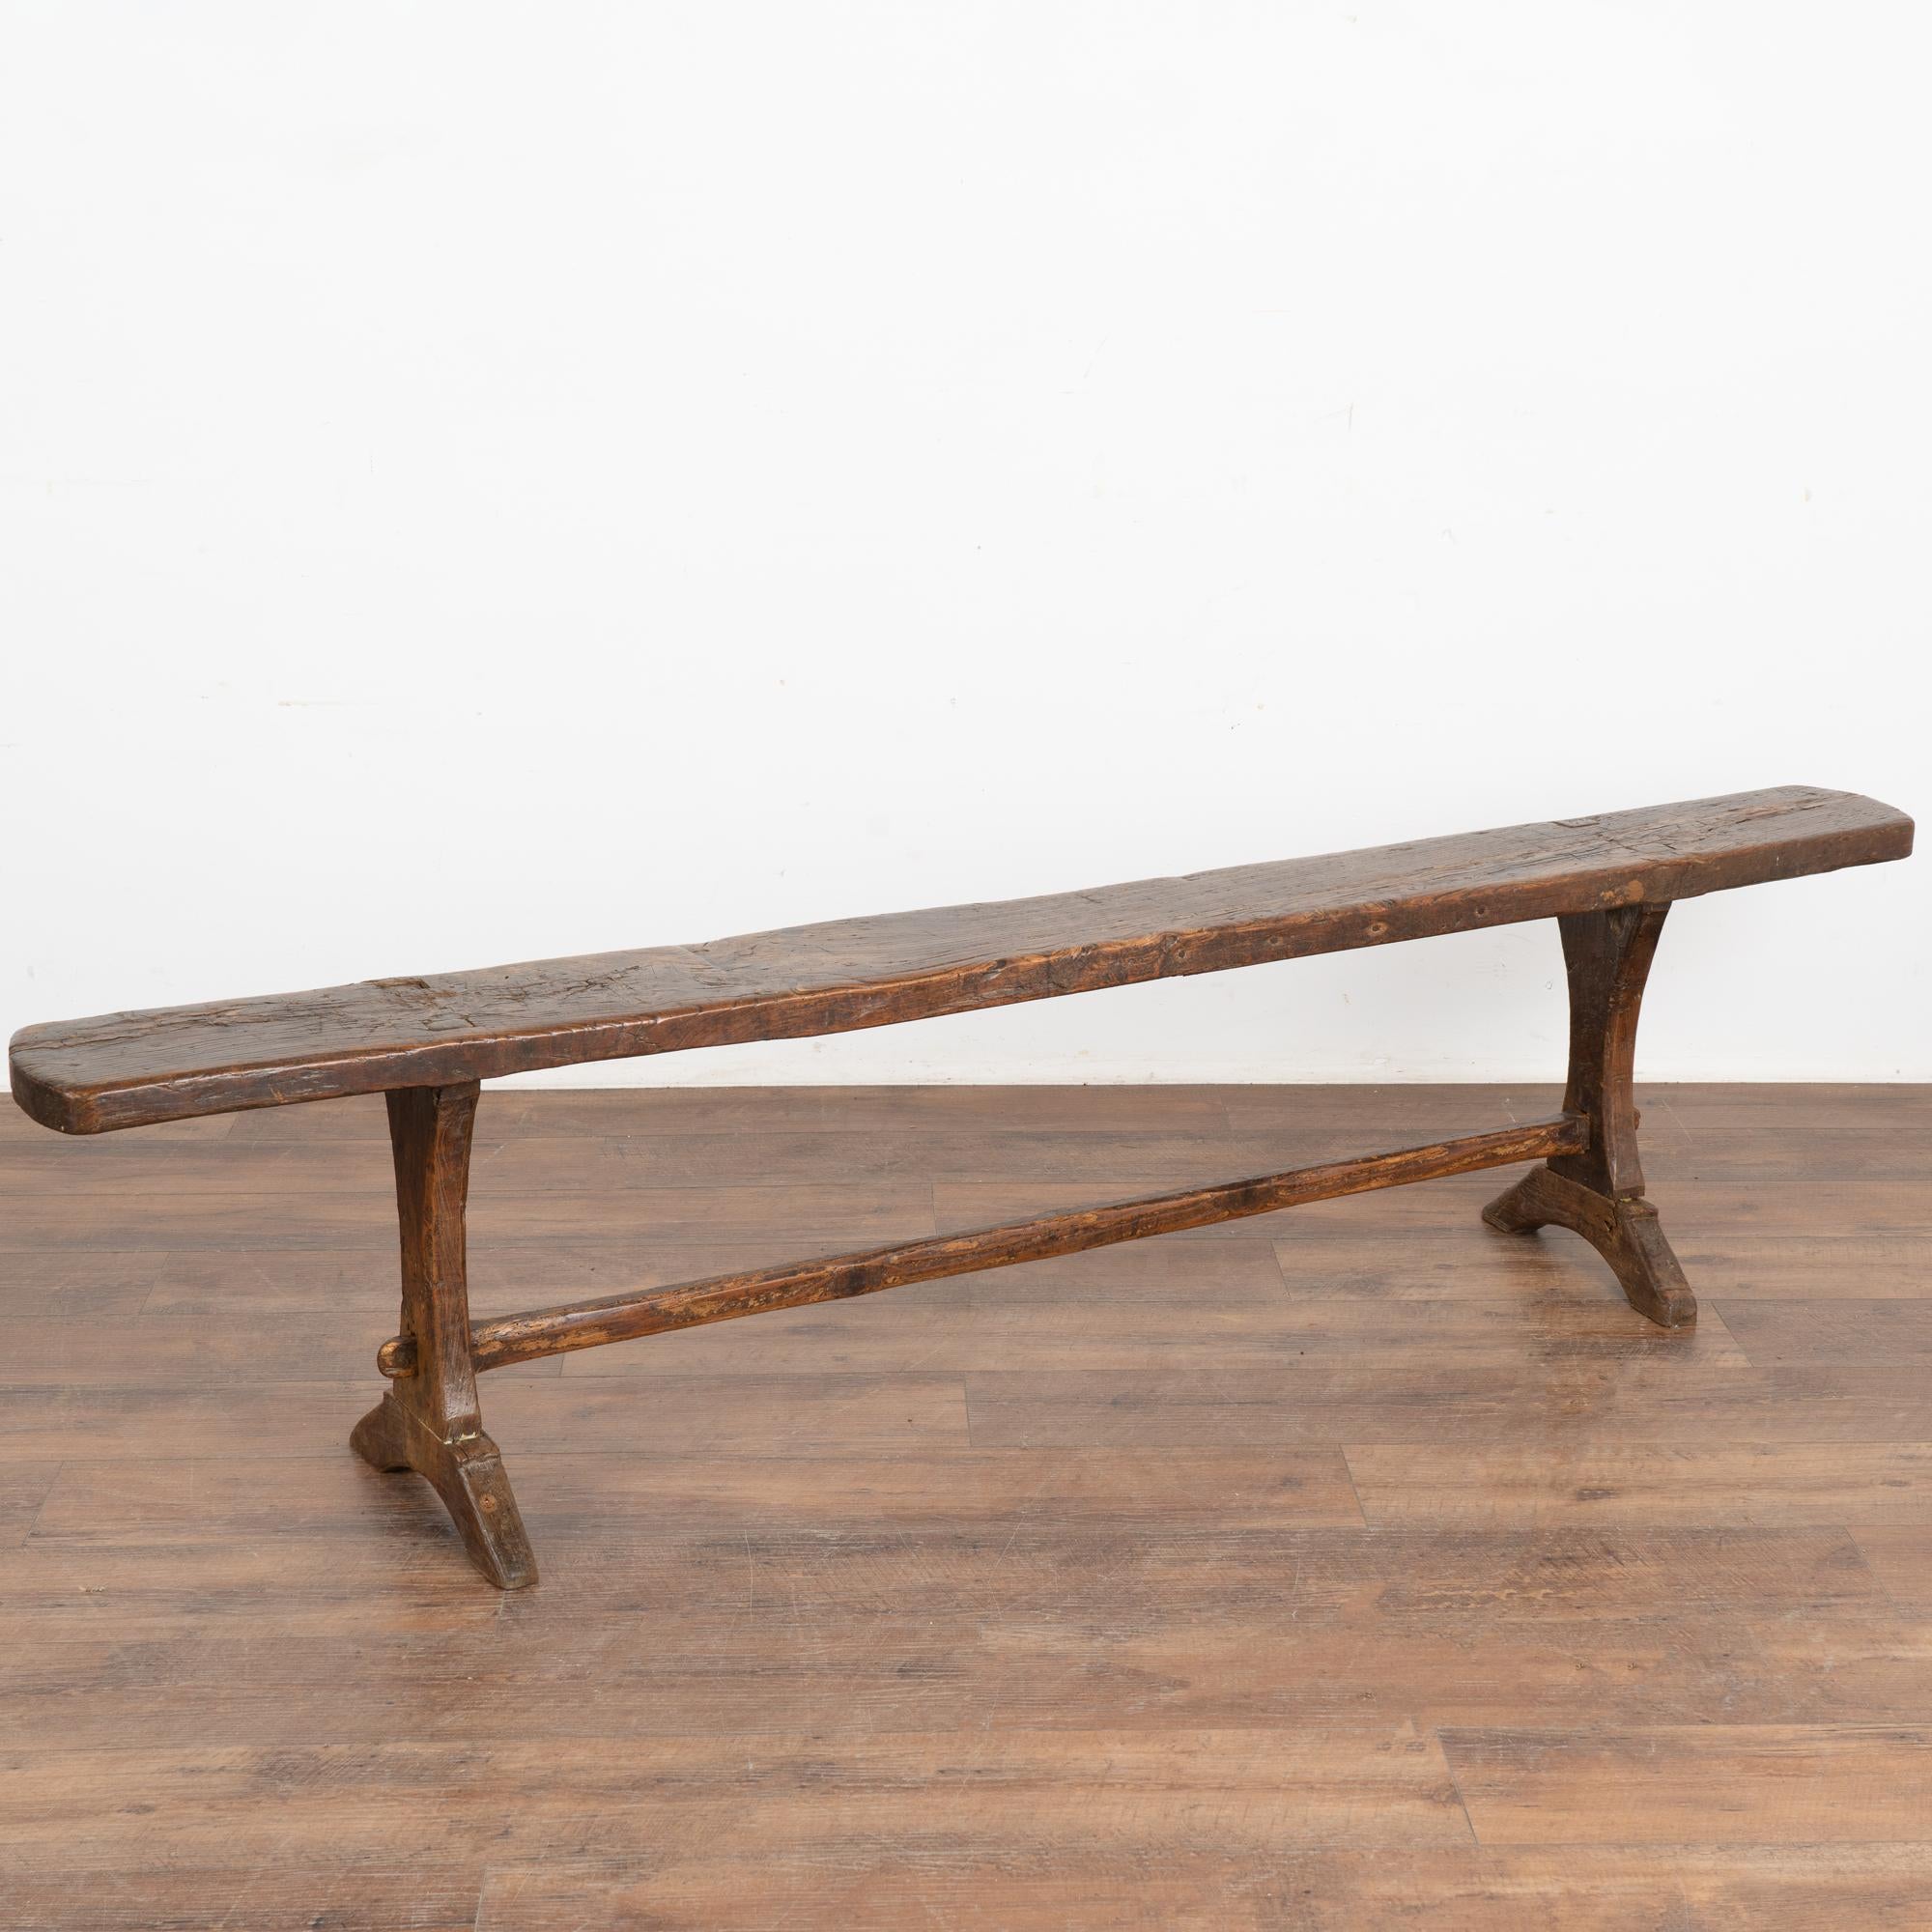 Rustic dark oak wood plank top bench with carved trestle legs and long stretcher.
The seat reveals generations of use with nicks, cracks, gnarls and gouges which add character to the narrow bench. 
Restored and waxed, this bench is just over 6.5'